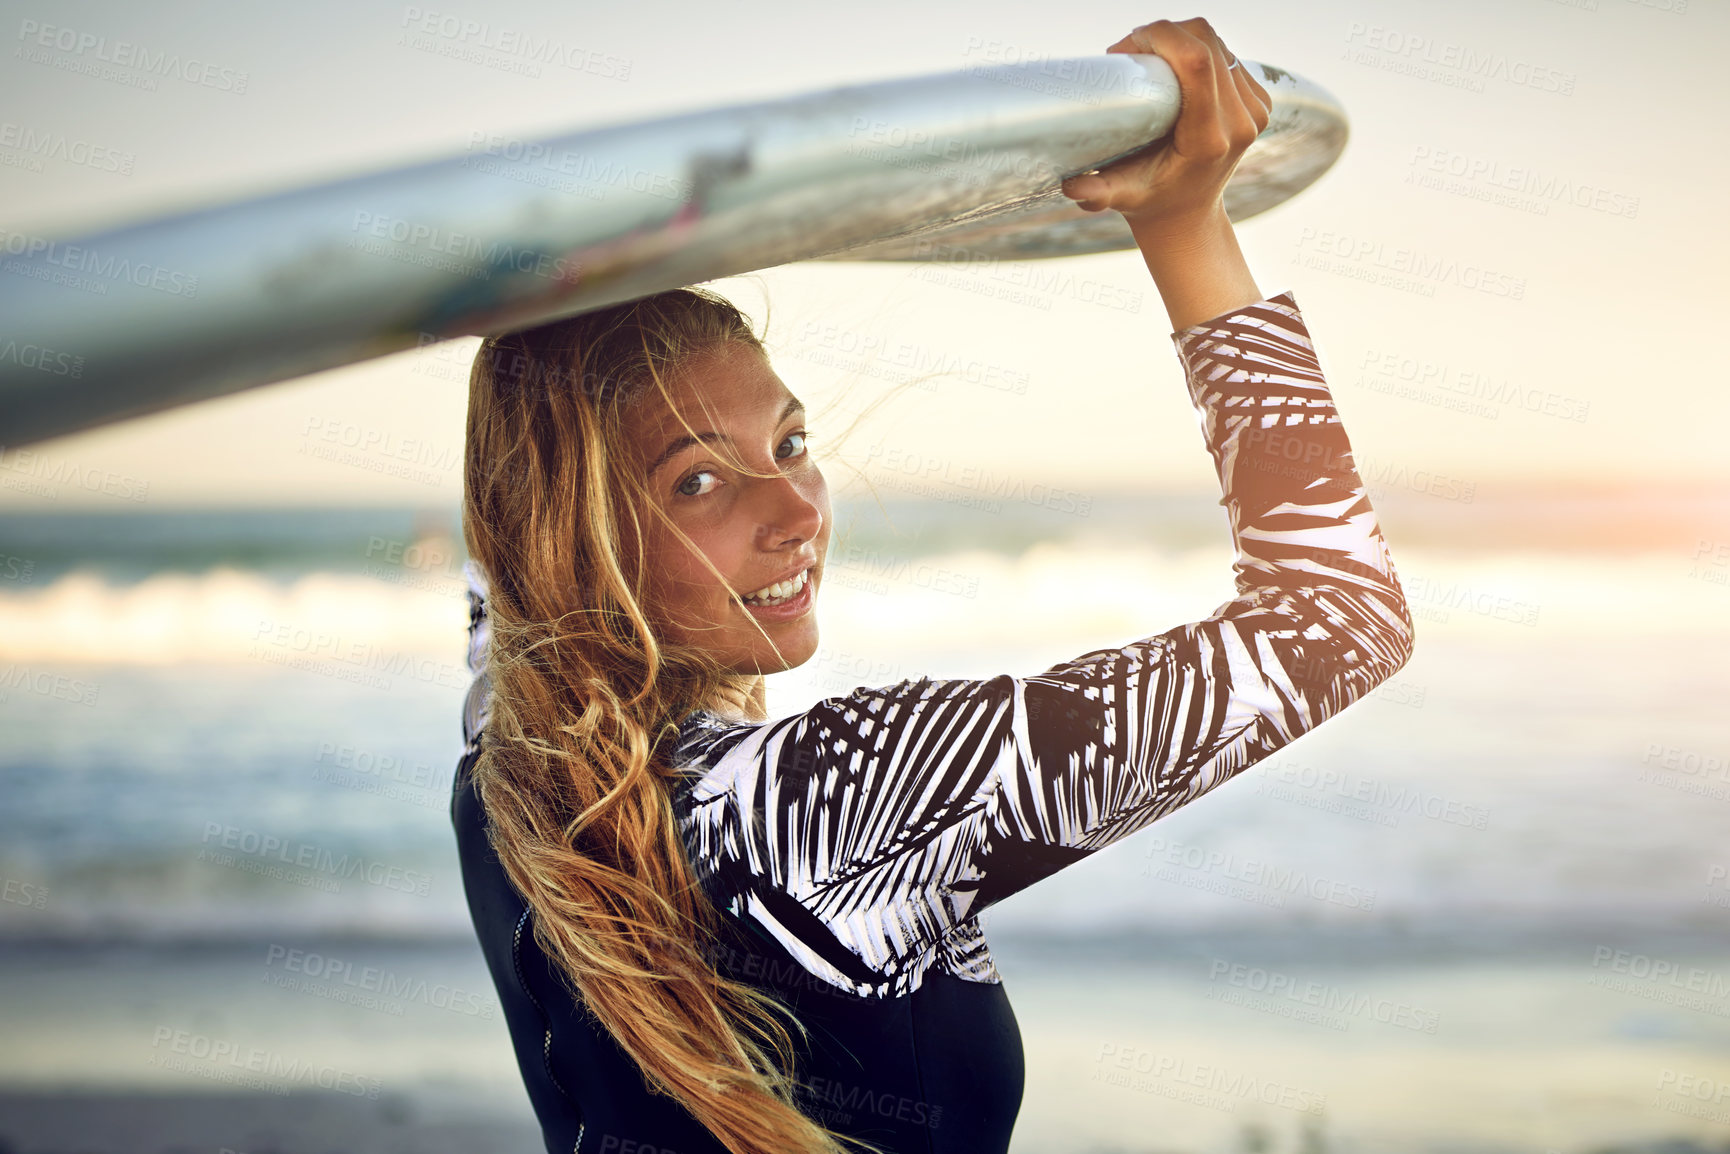 Buy stock photo Rearview portrait of an attractive young female surfer standing with her surfboard looking over the ocean